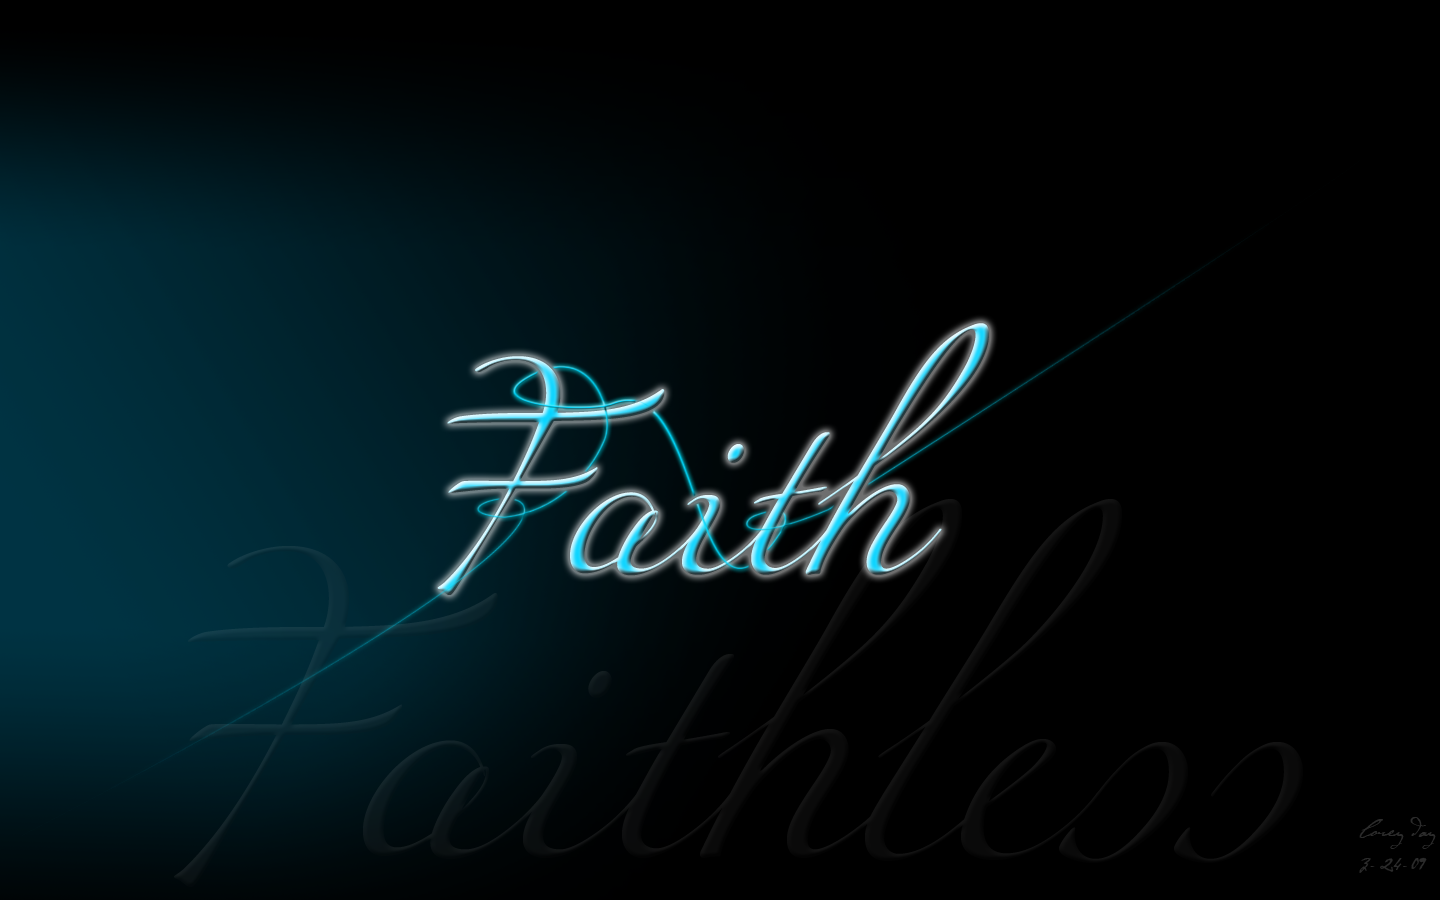 Live By Faith! | Christian Wallpapers